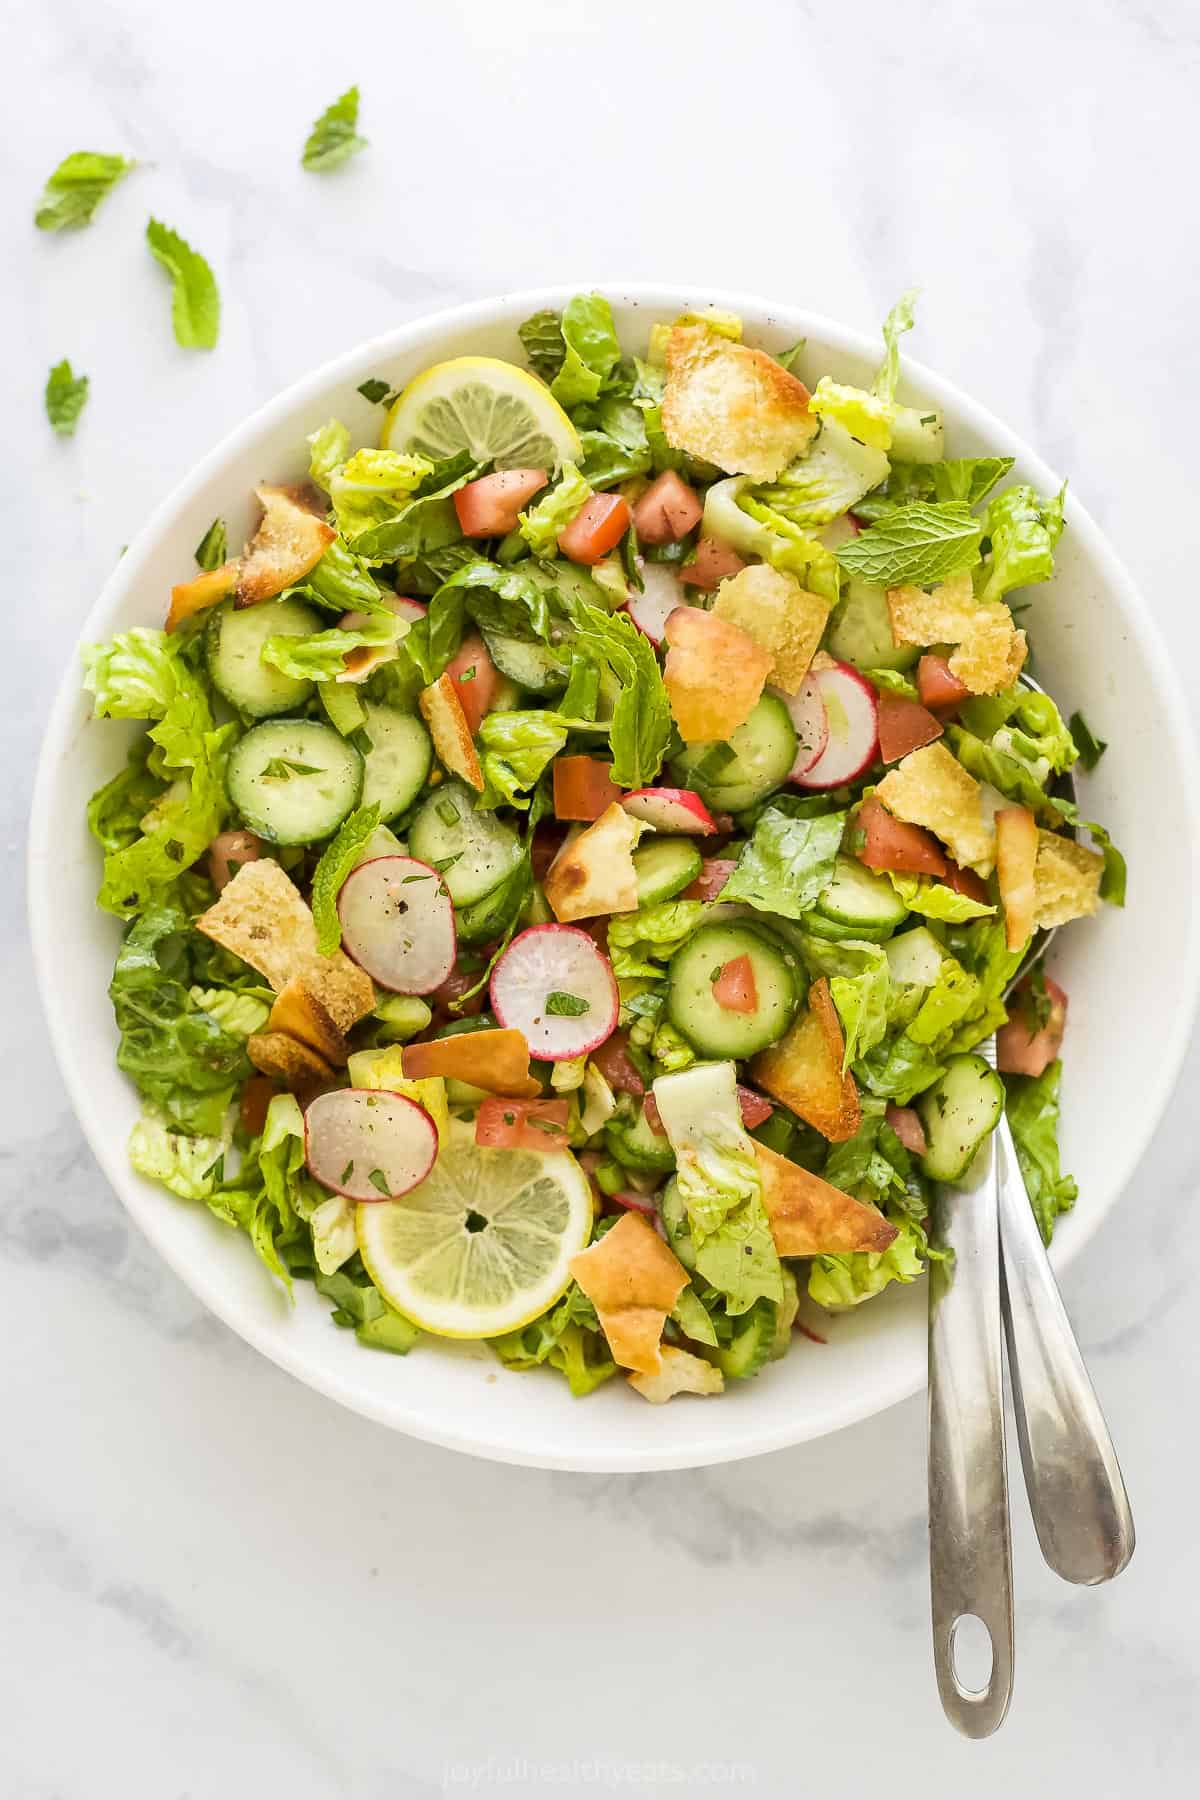 A large bowl of fattoush salad with two metal spoons inside